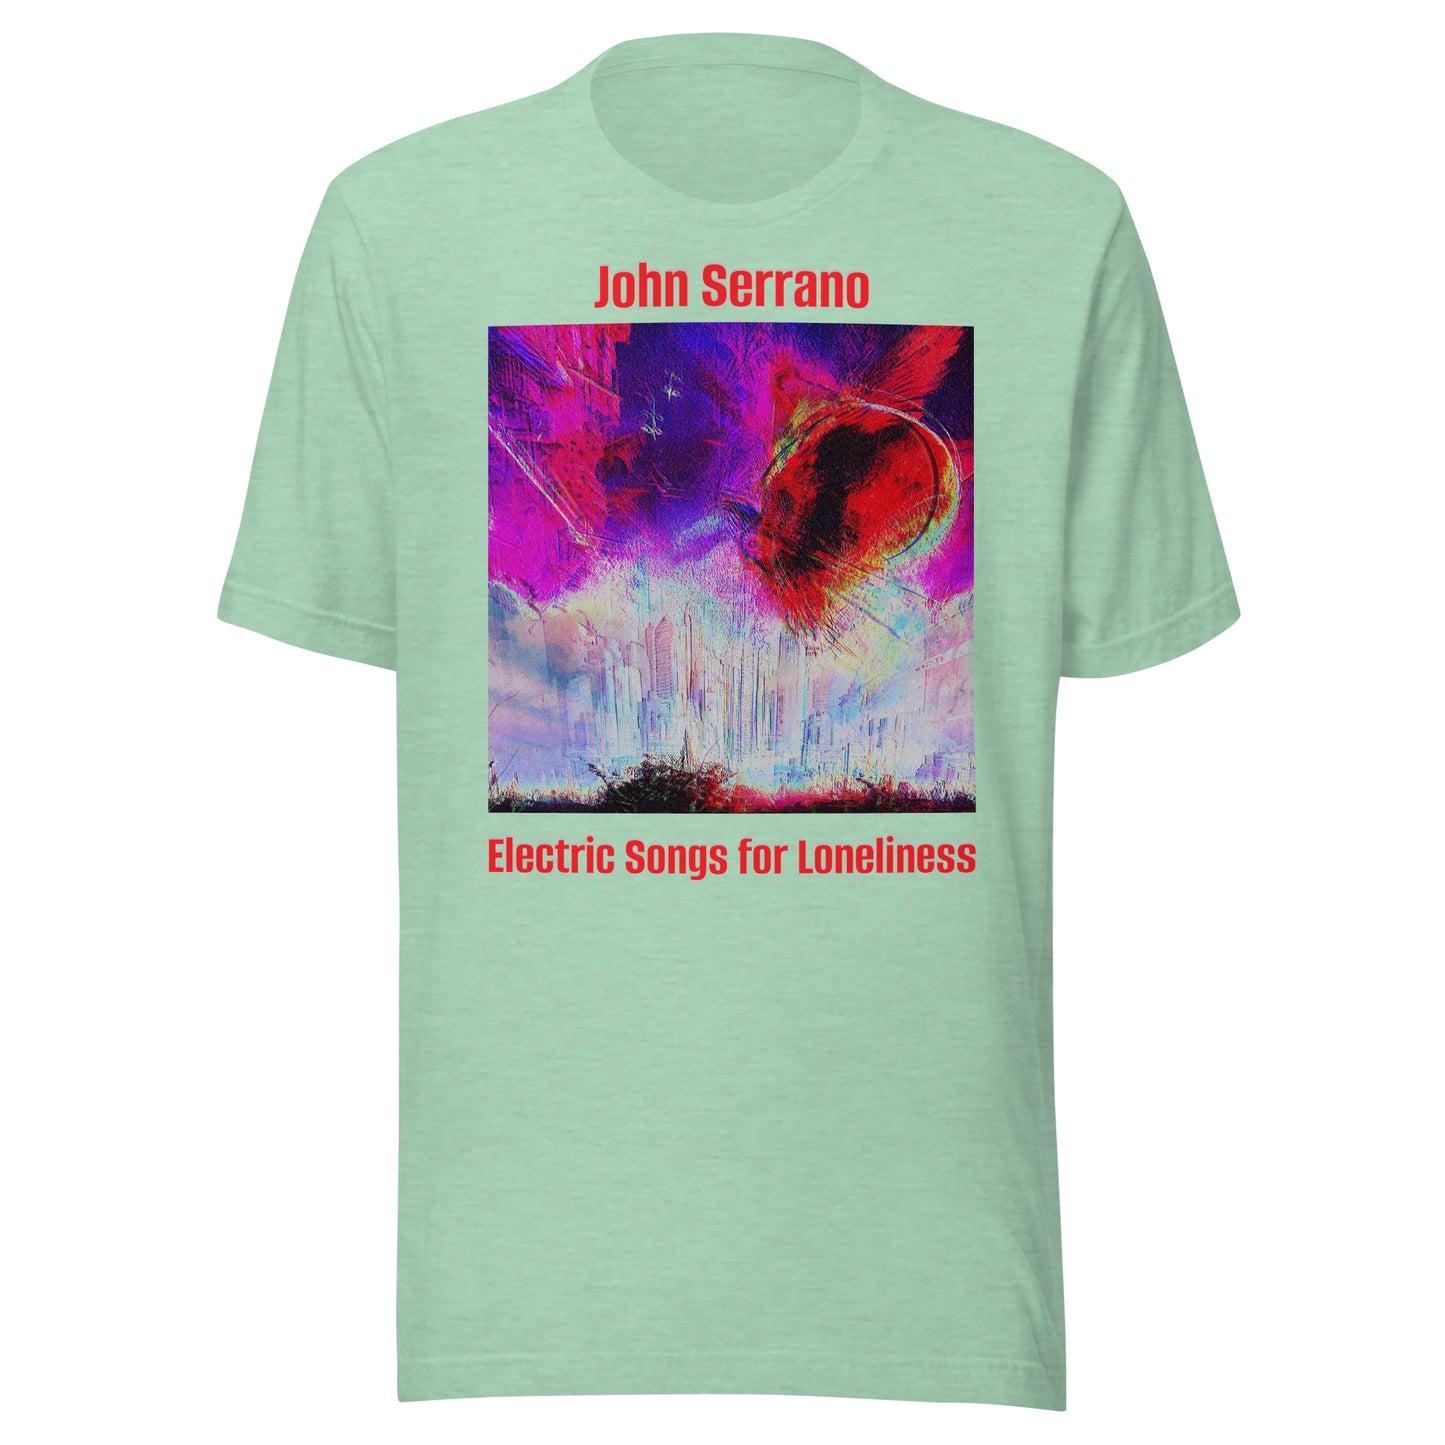 John Serrano - Electric Songs For Loneliness T-Shirt